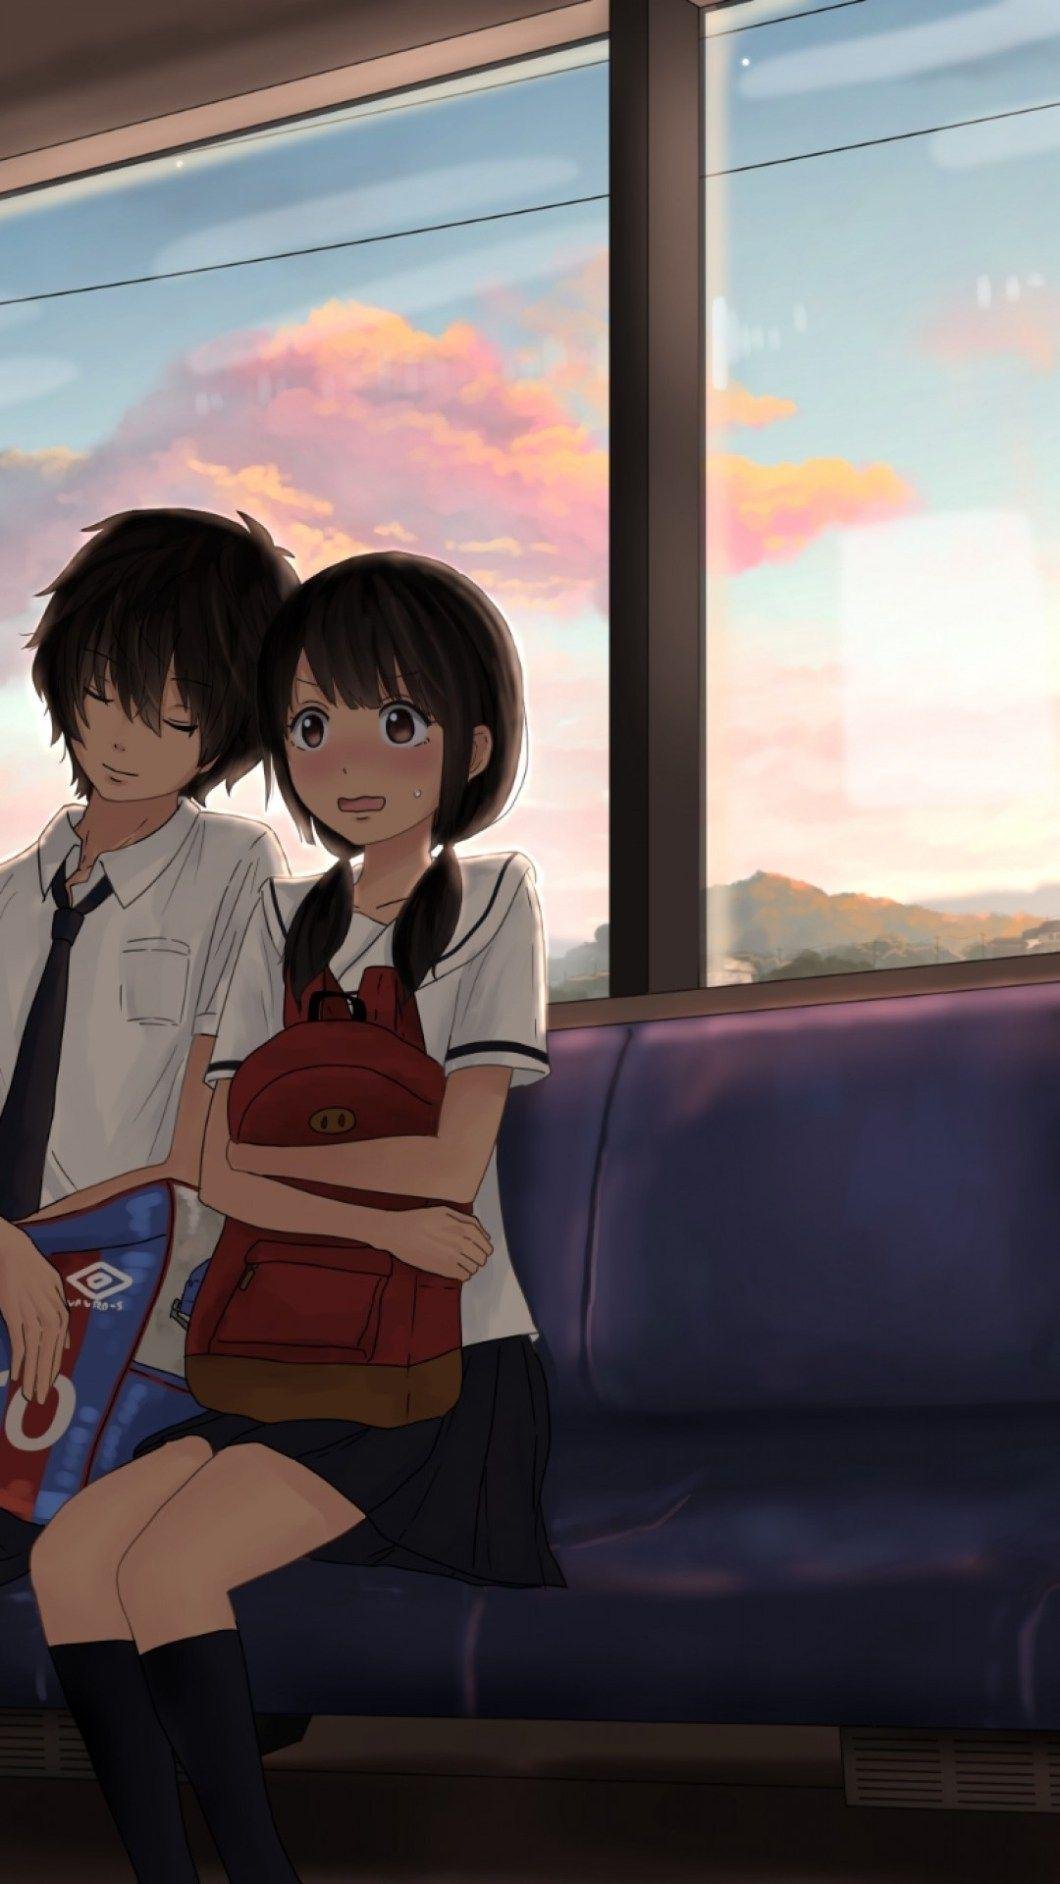 The 23 Best Romance Comedy Anime | Rom-Coms